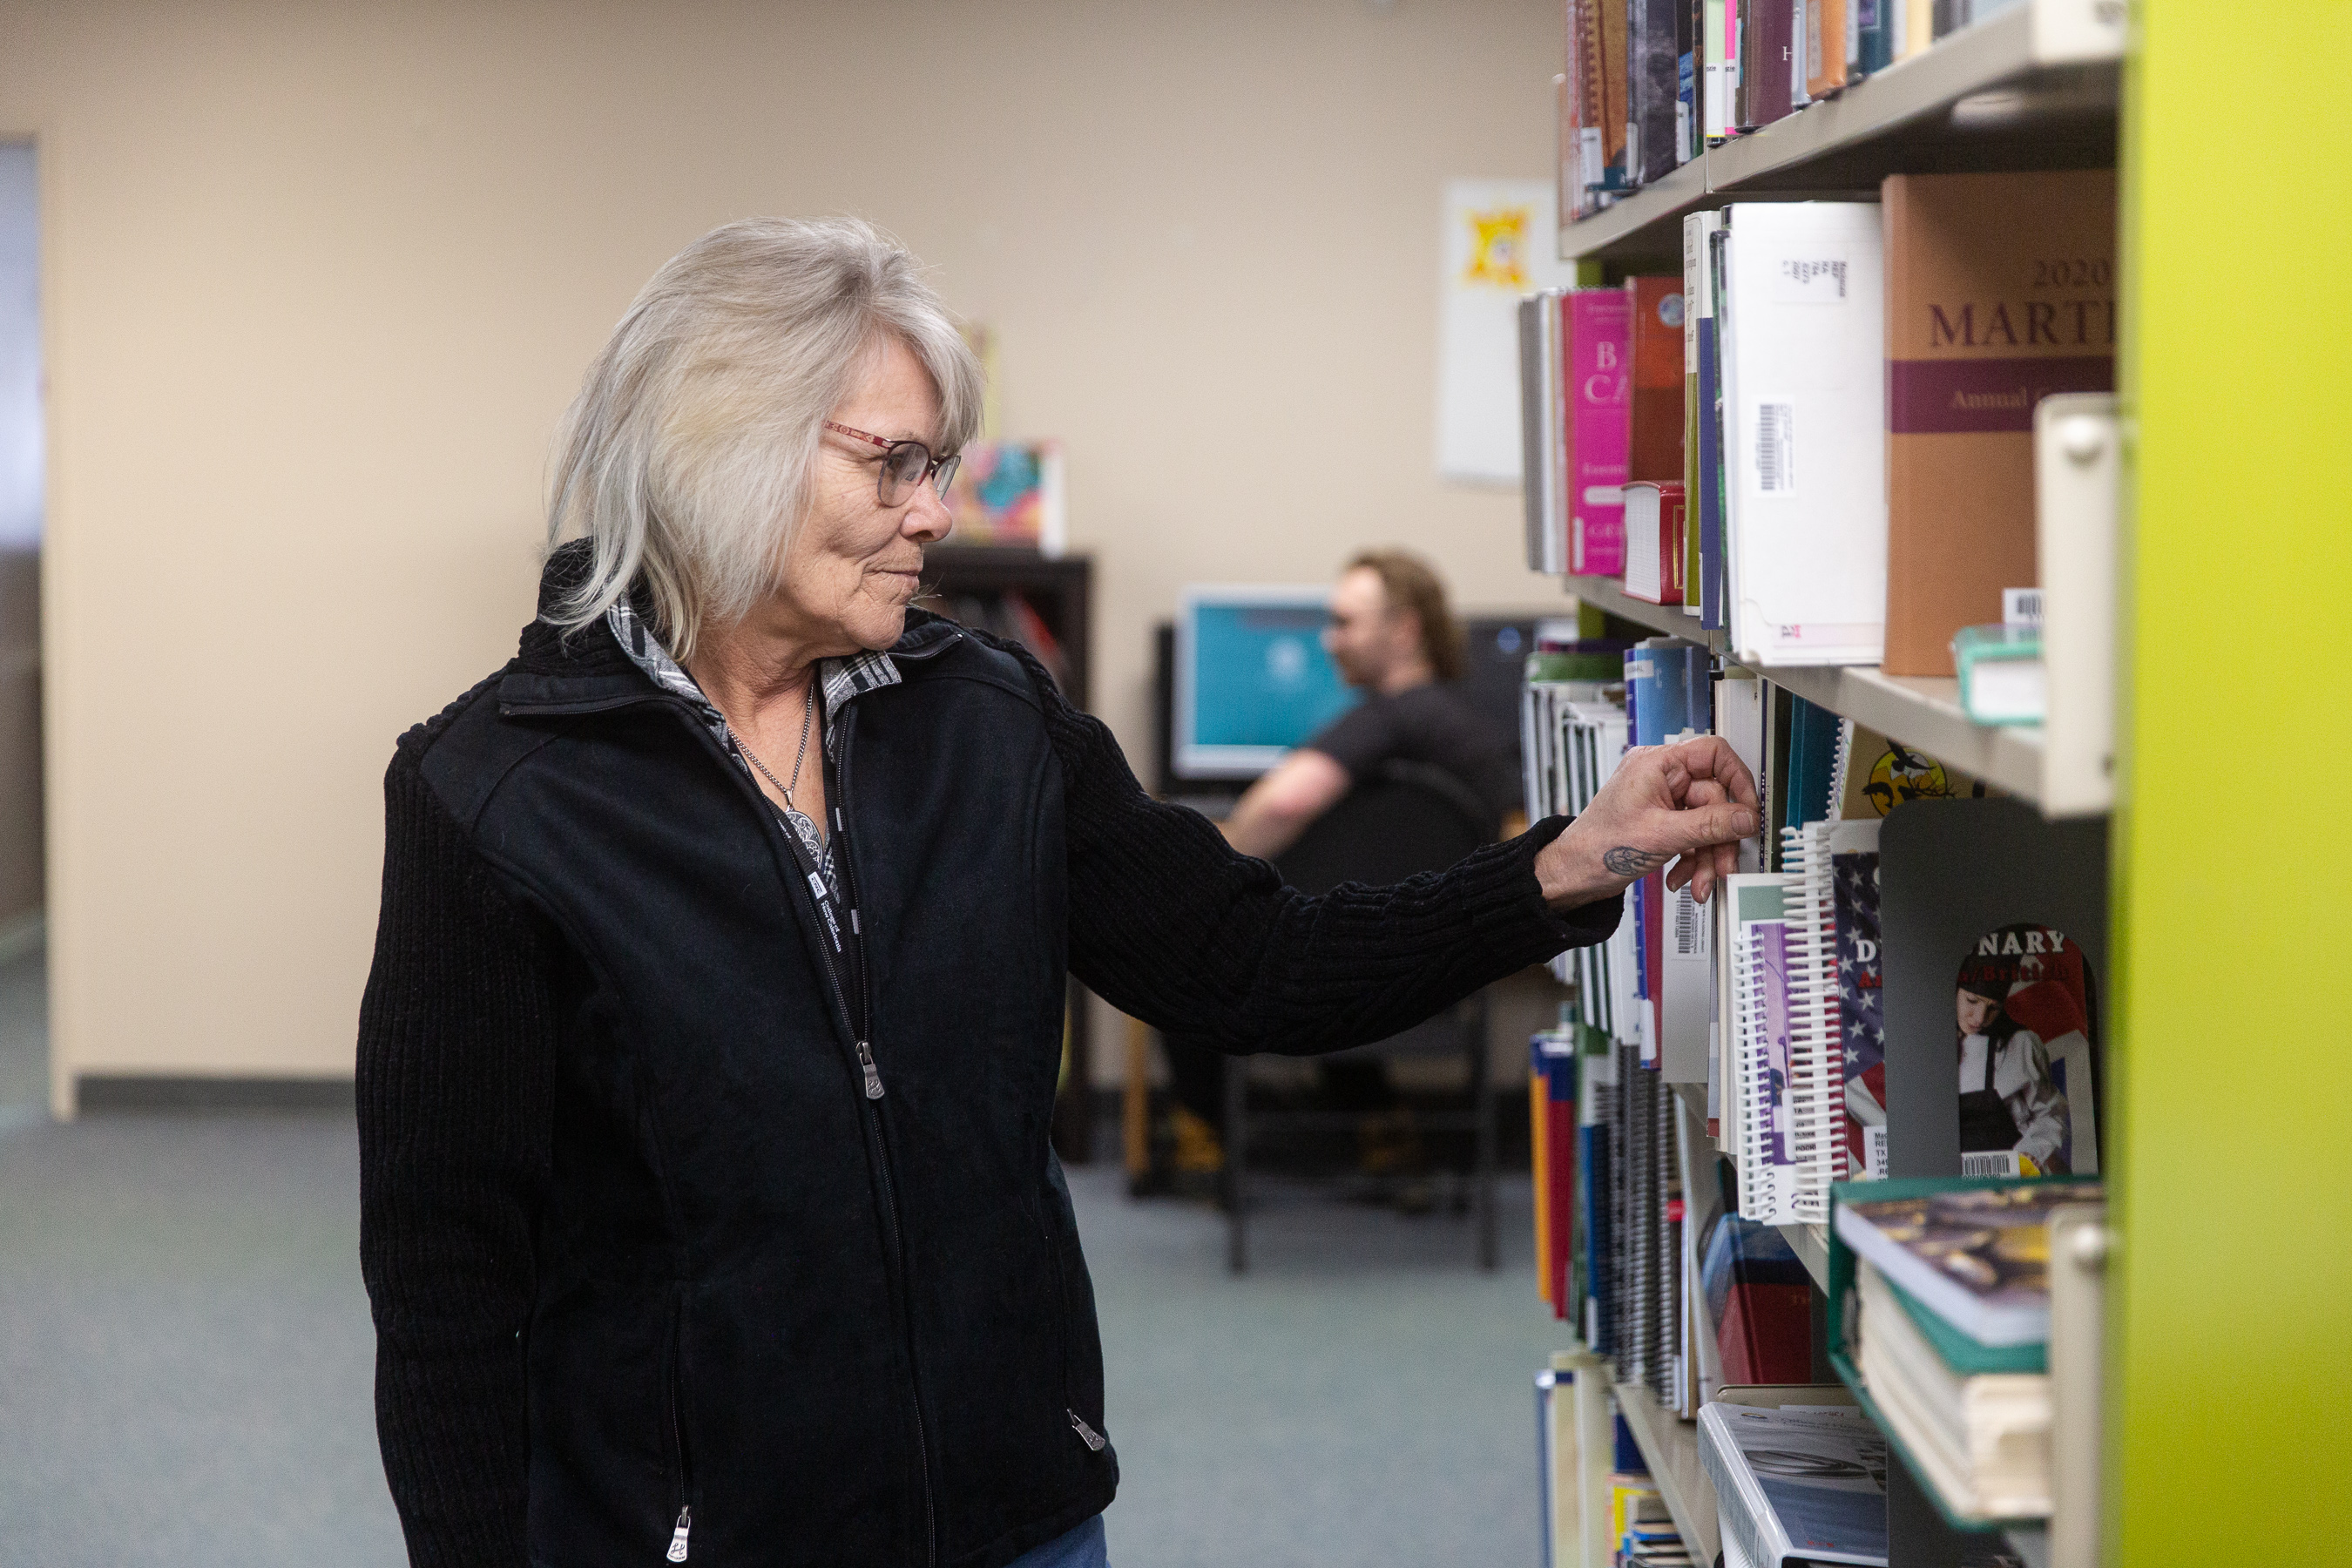 Woman selecting a book in a library